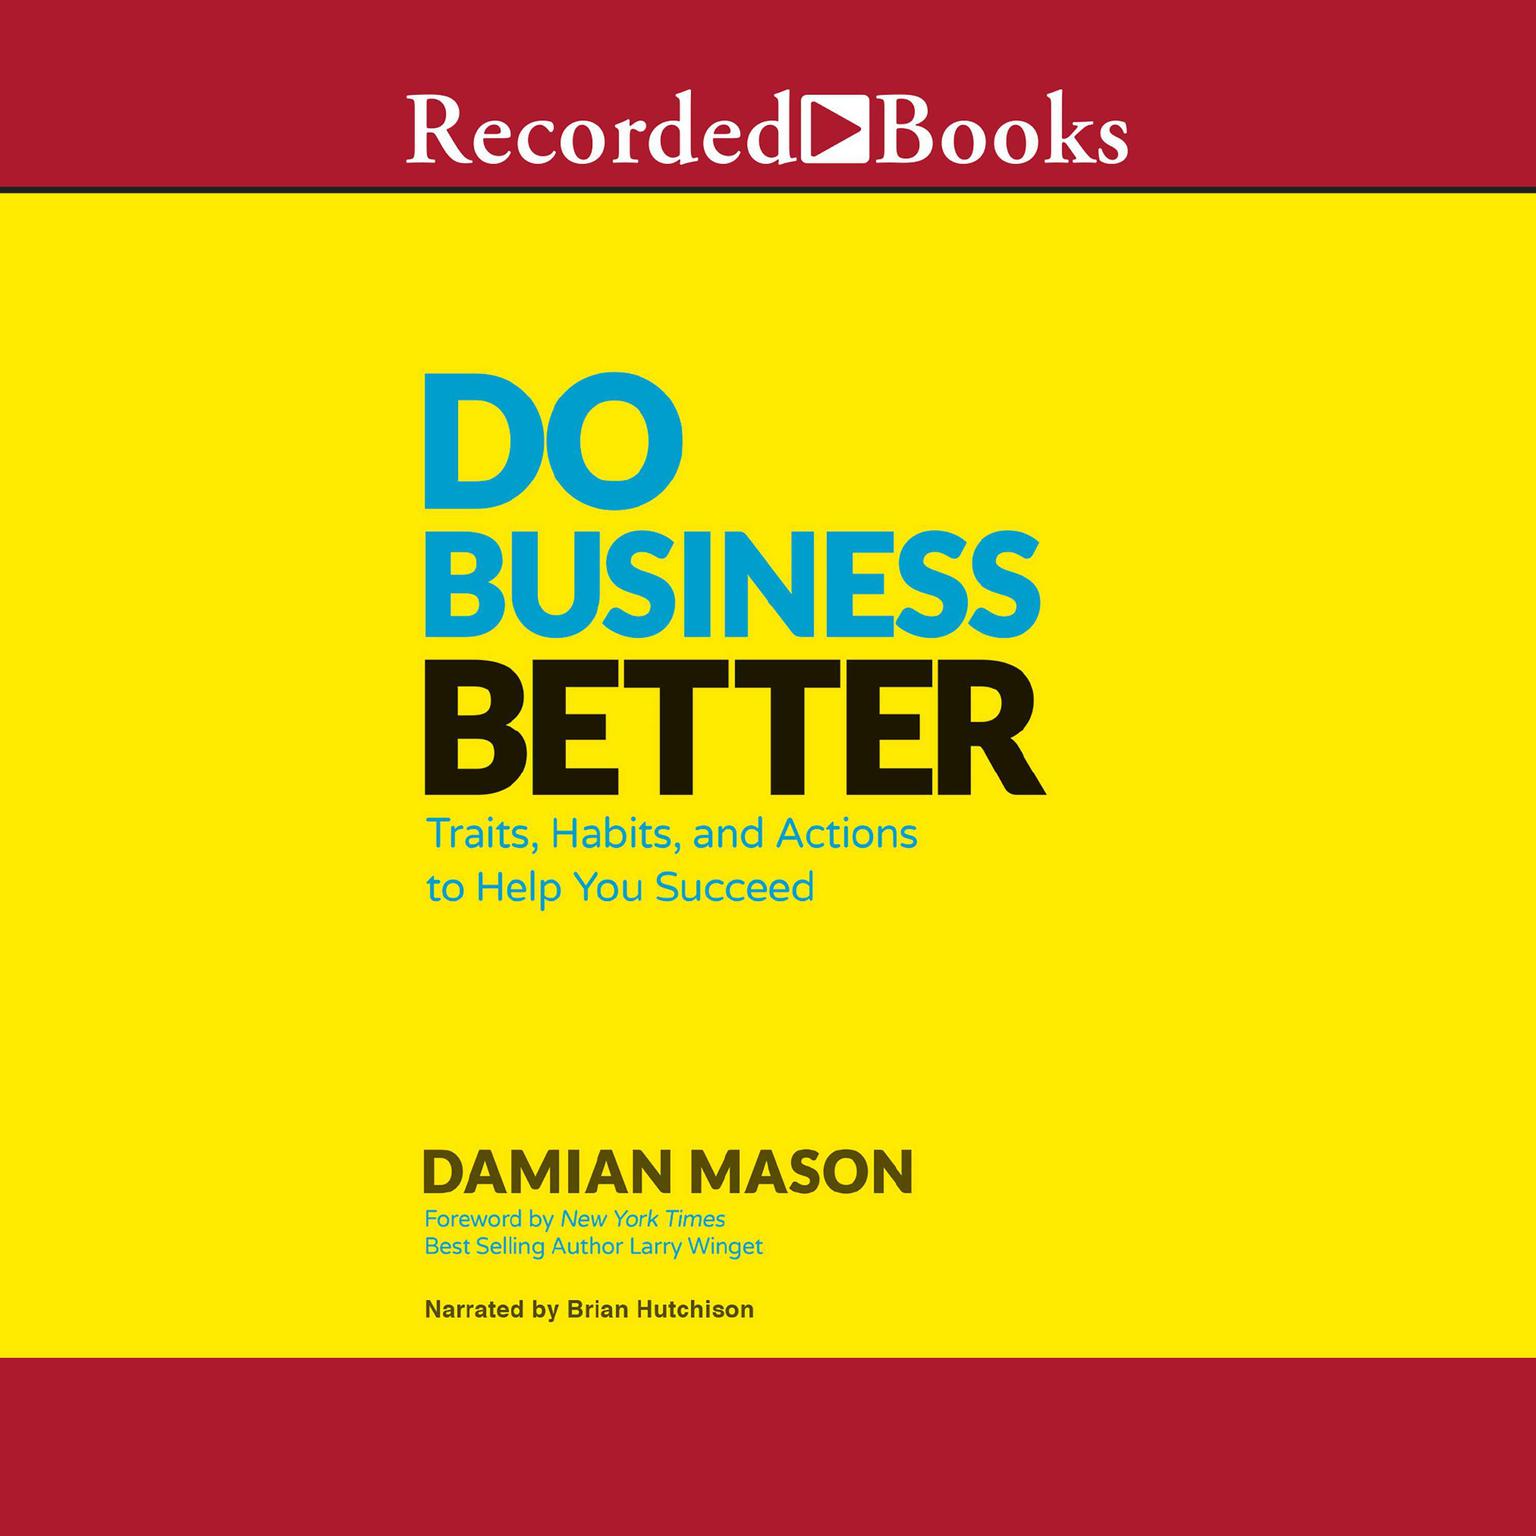 Do Business Better: Traits, Habits, & Actions to Help You Succeed Audiobook, by Damian Mason